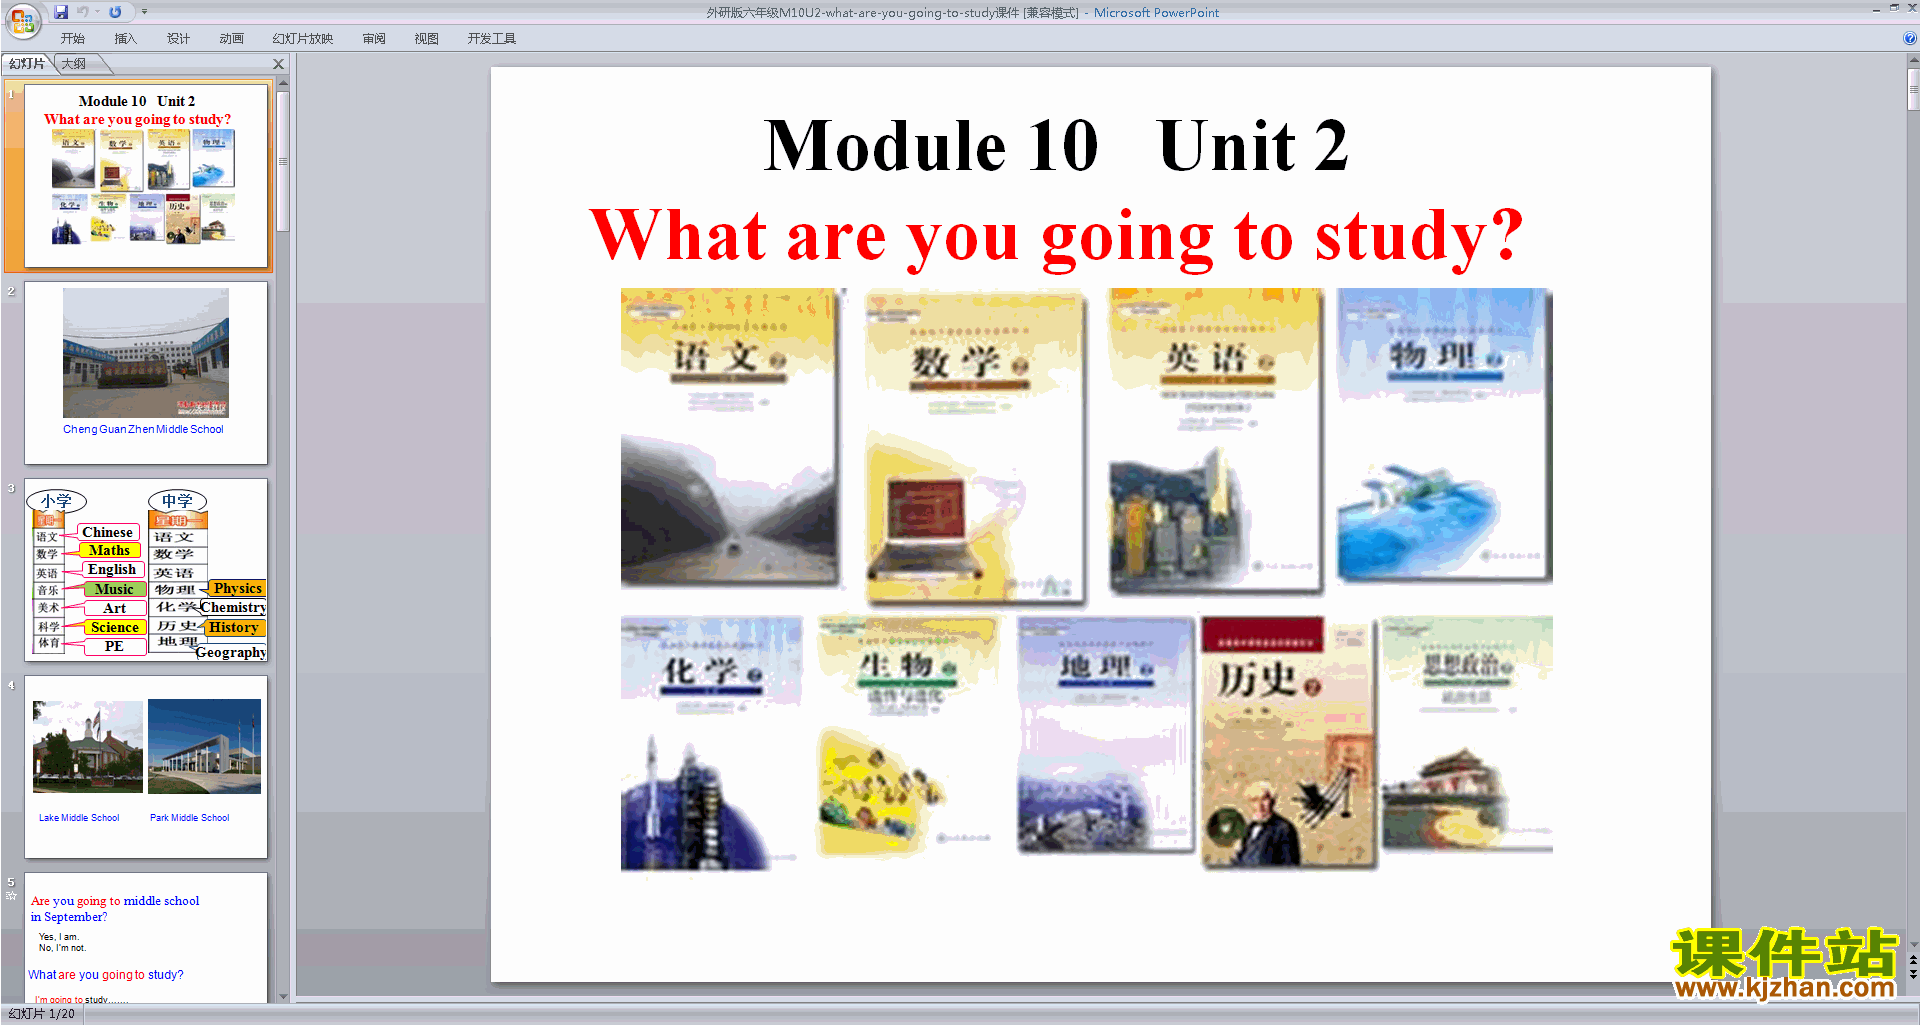 пModule10 Unit2 What are you going to studypptμ